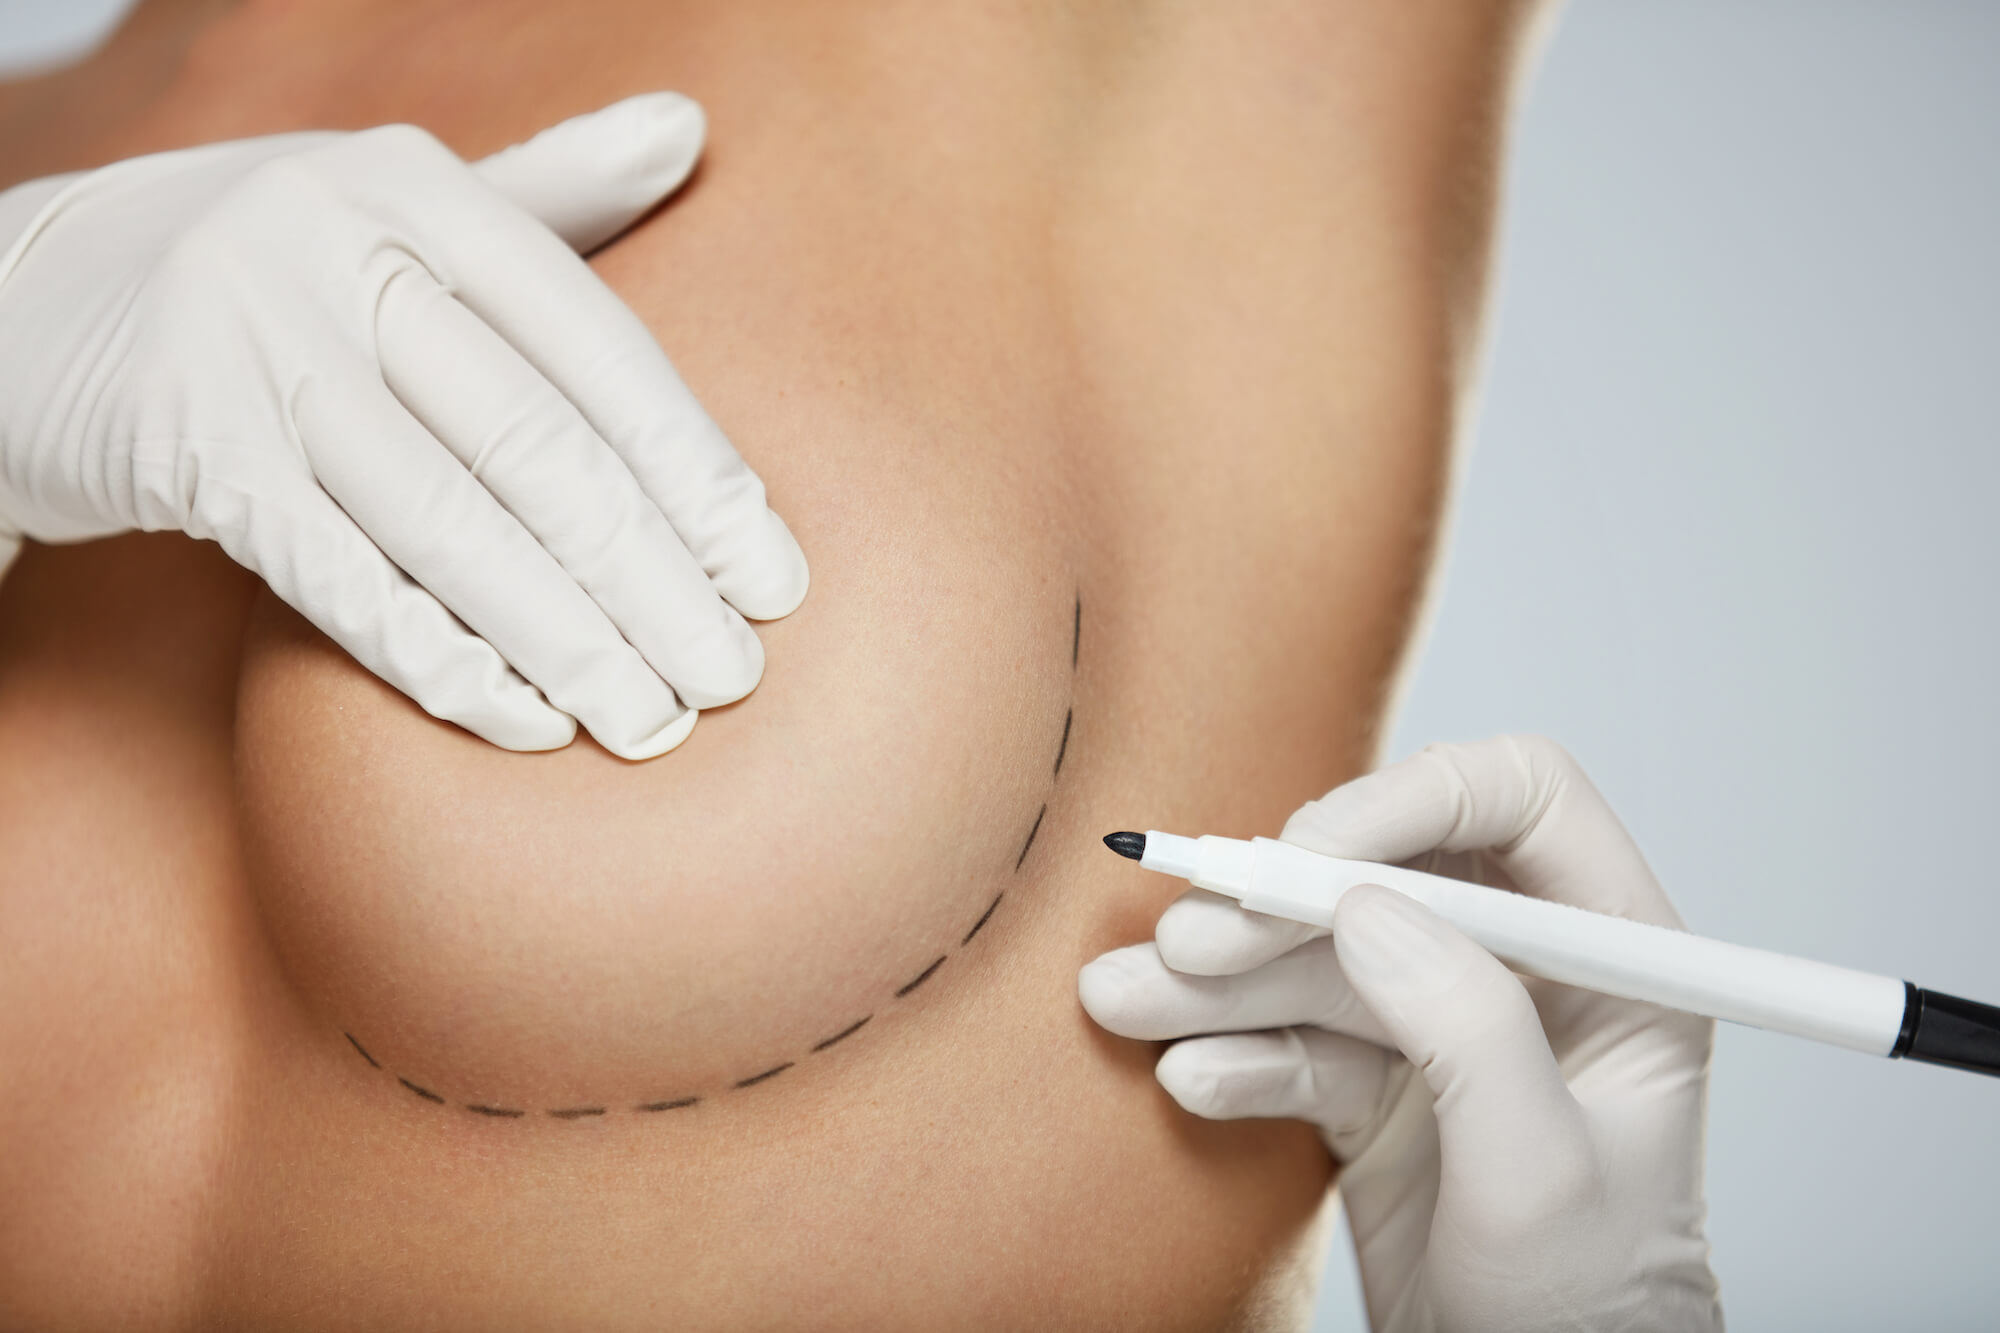 Line's Drawn on Woman's Breast in Preparation for and Augmentation or Reshaping Surgery